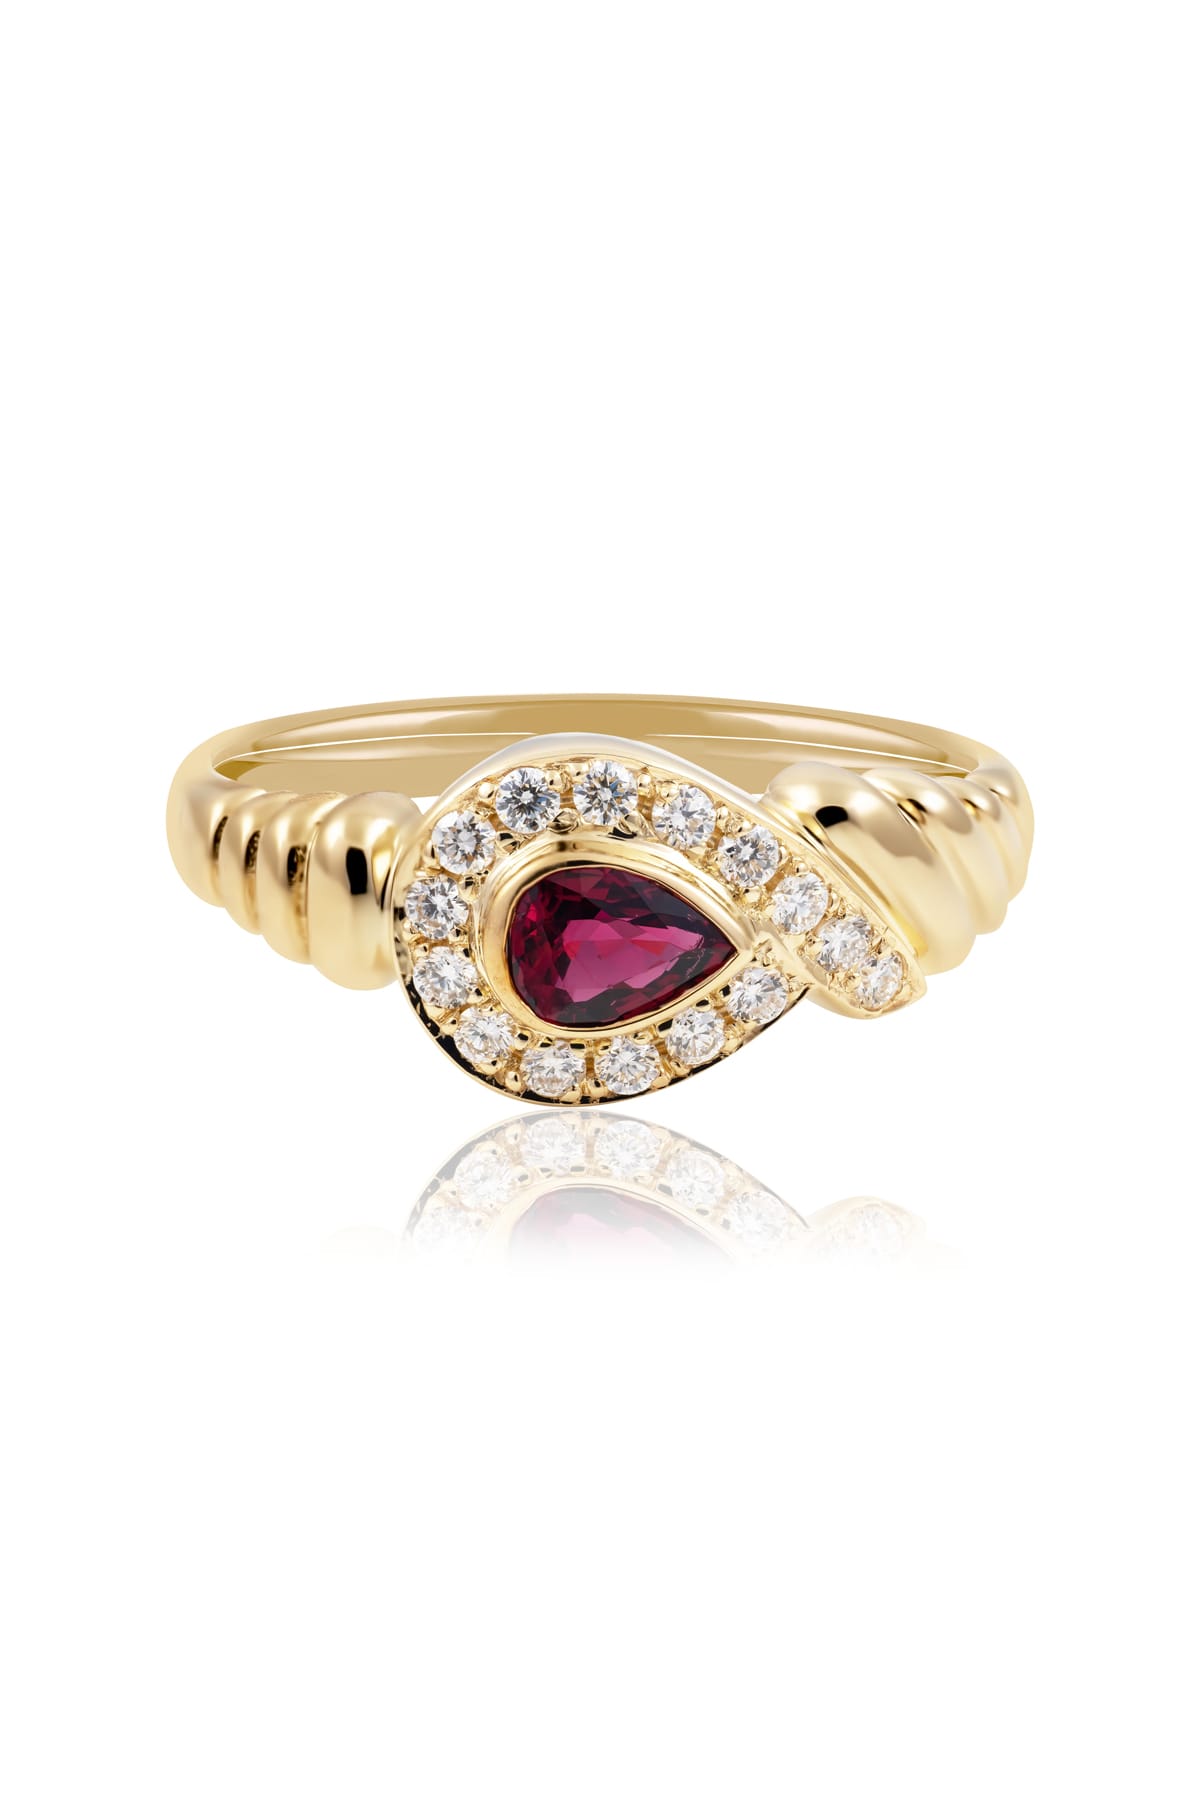 9 Carat Yellow Gold Pear Shaped Ruby Ring available at LeGassick Diamonds and Jewellery Gold Coast, Australia.